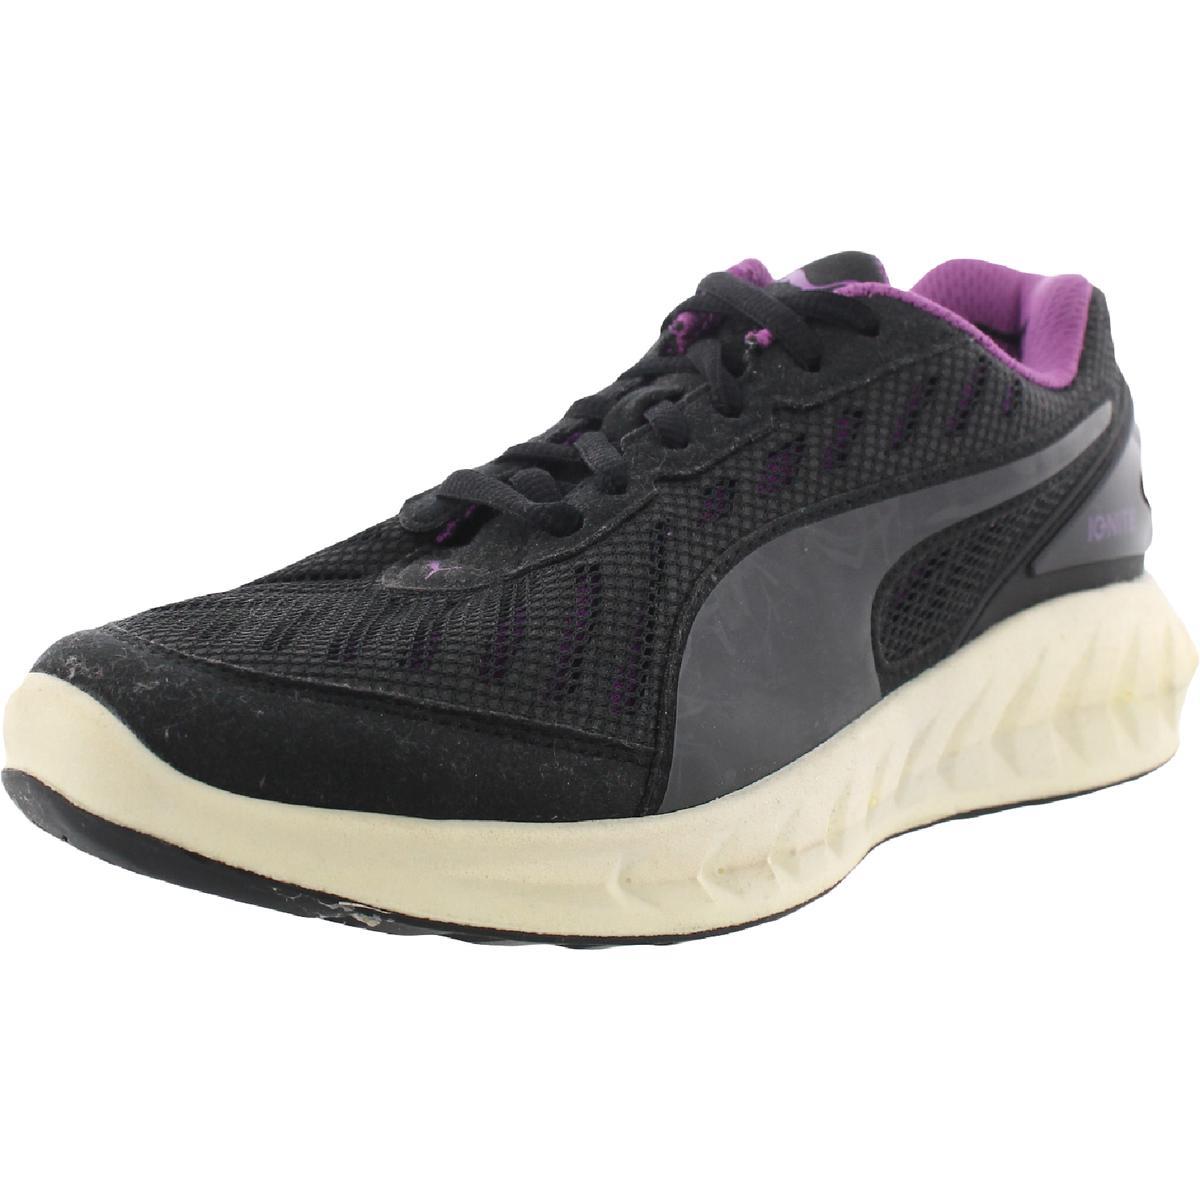 Puma Womens Ignite Ultimate Trainer Athletic and Training Shoes Shoes Bhfo 1175 Black-Purple-Cactus Flower